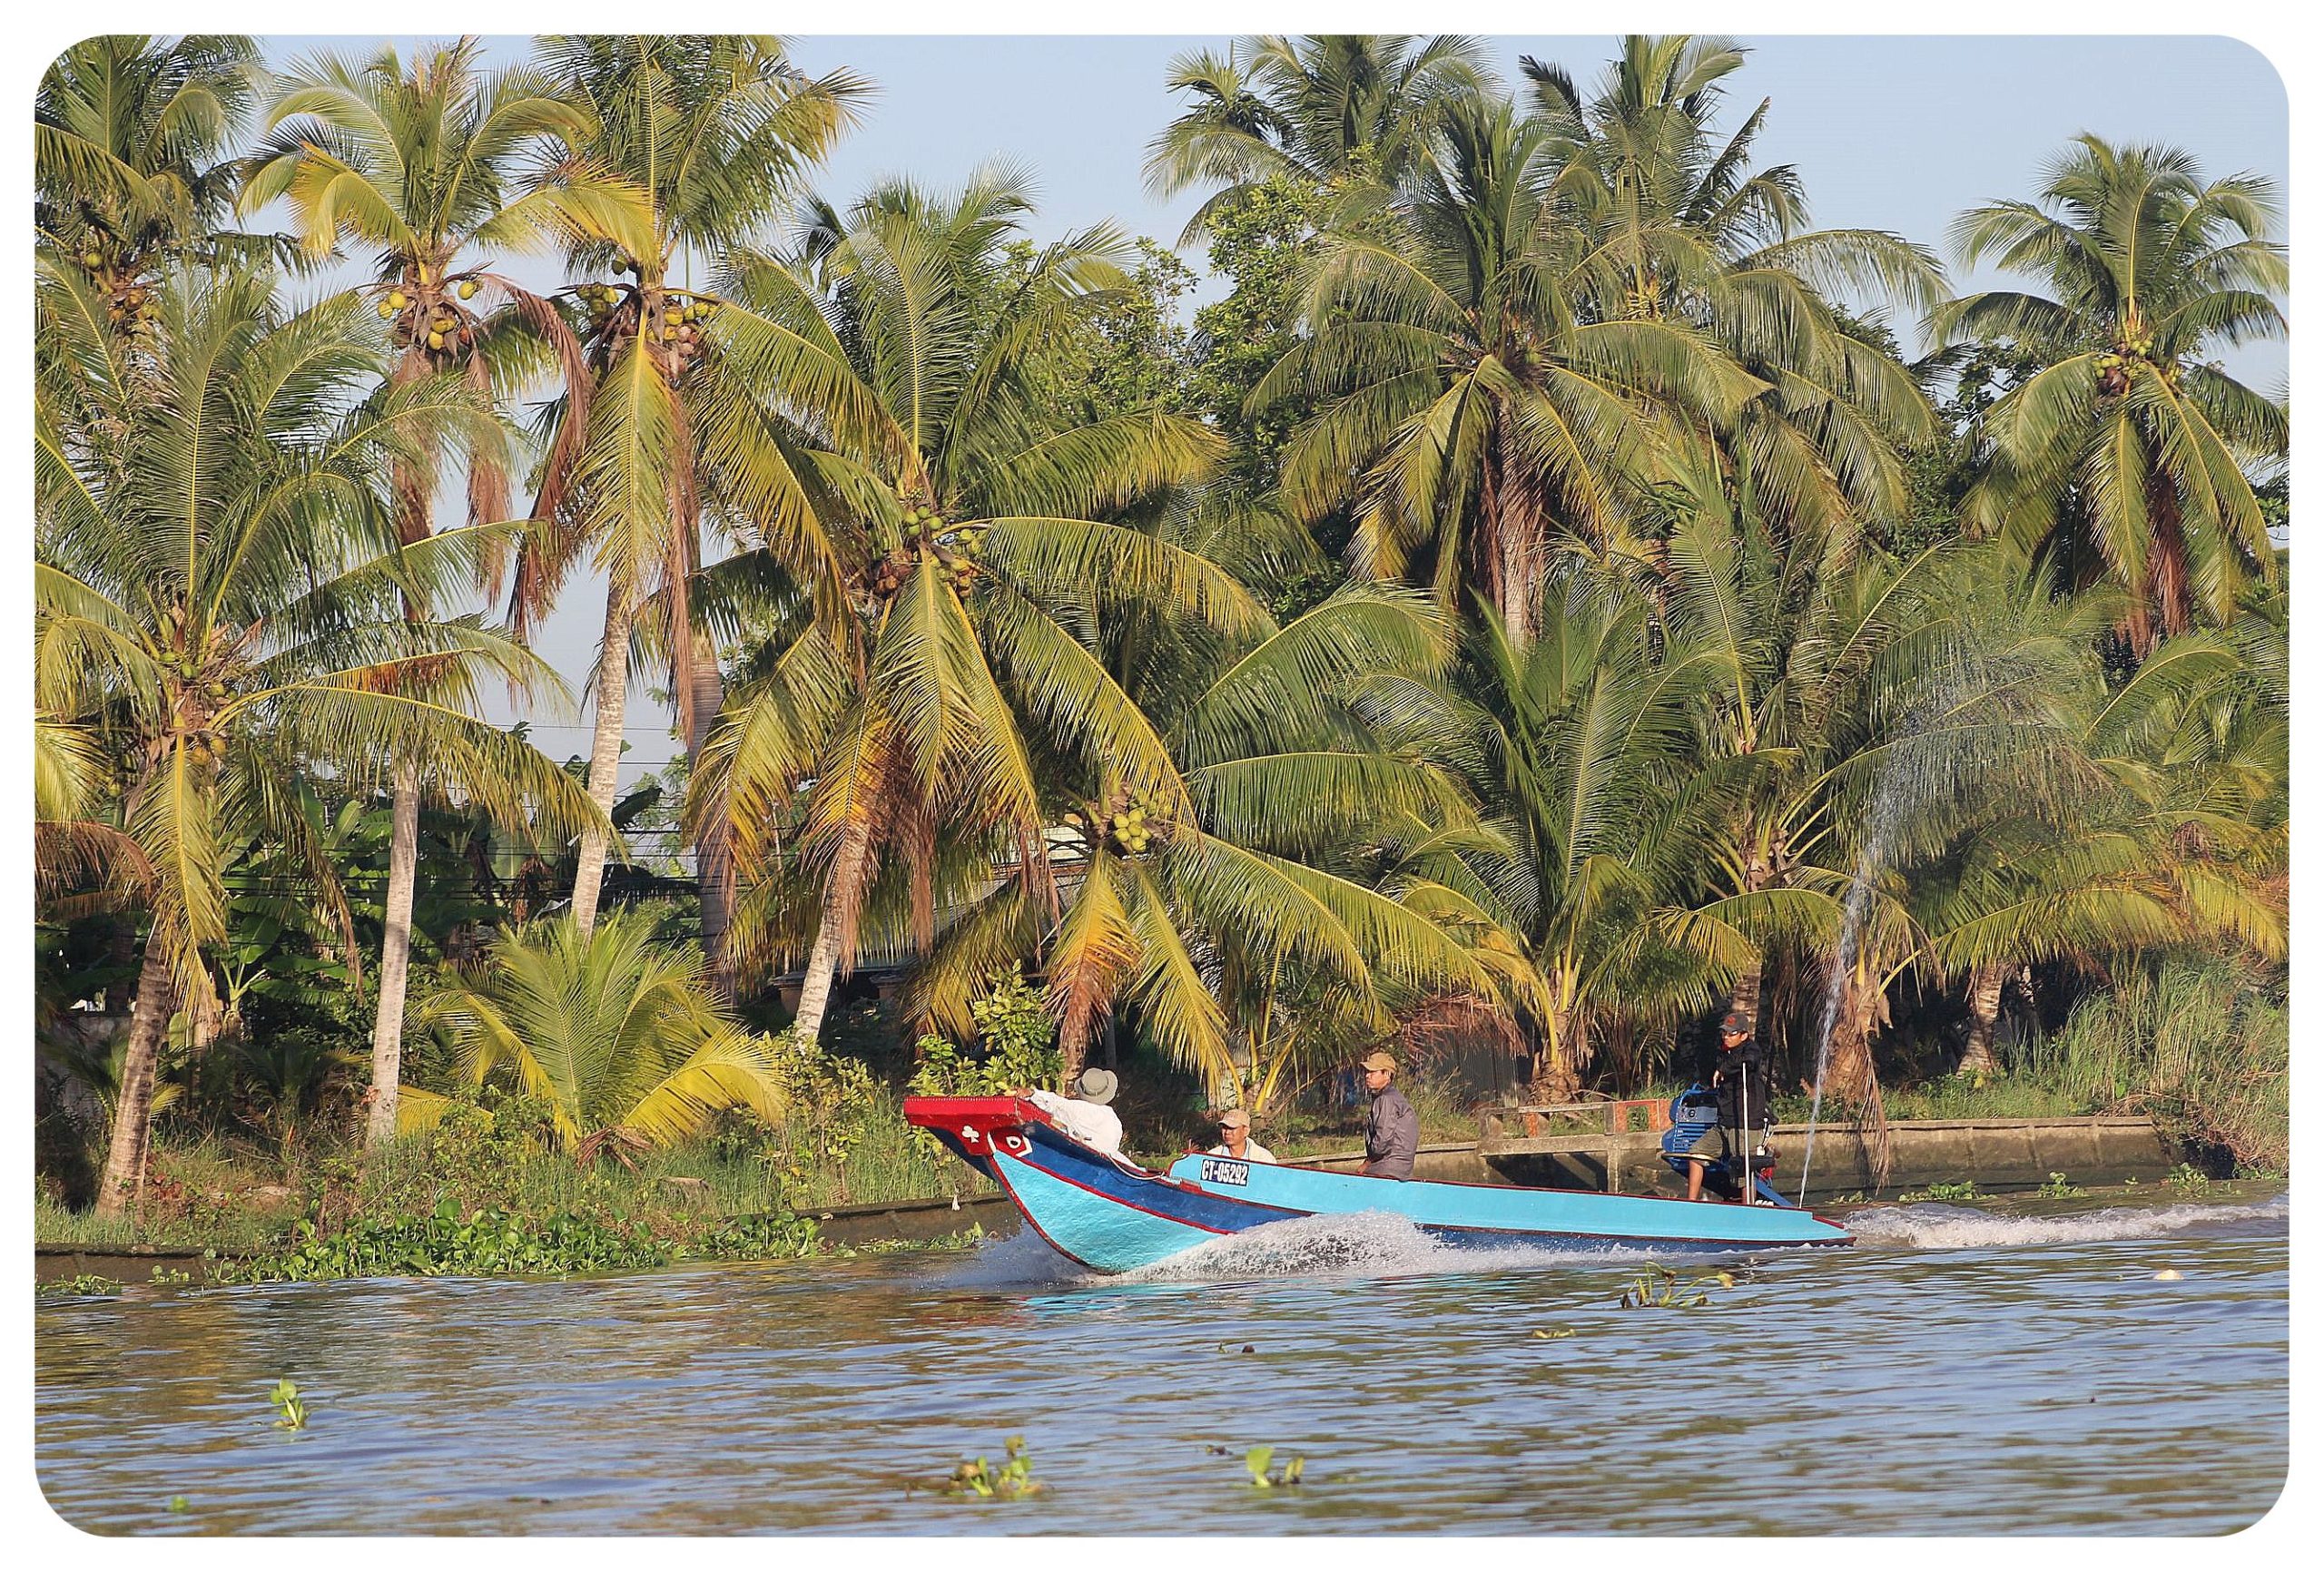 Vietnam’s Mekong Delta: Floating Markets and Life On The River